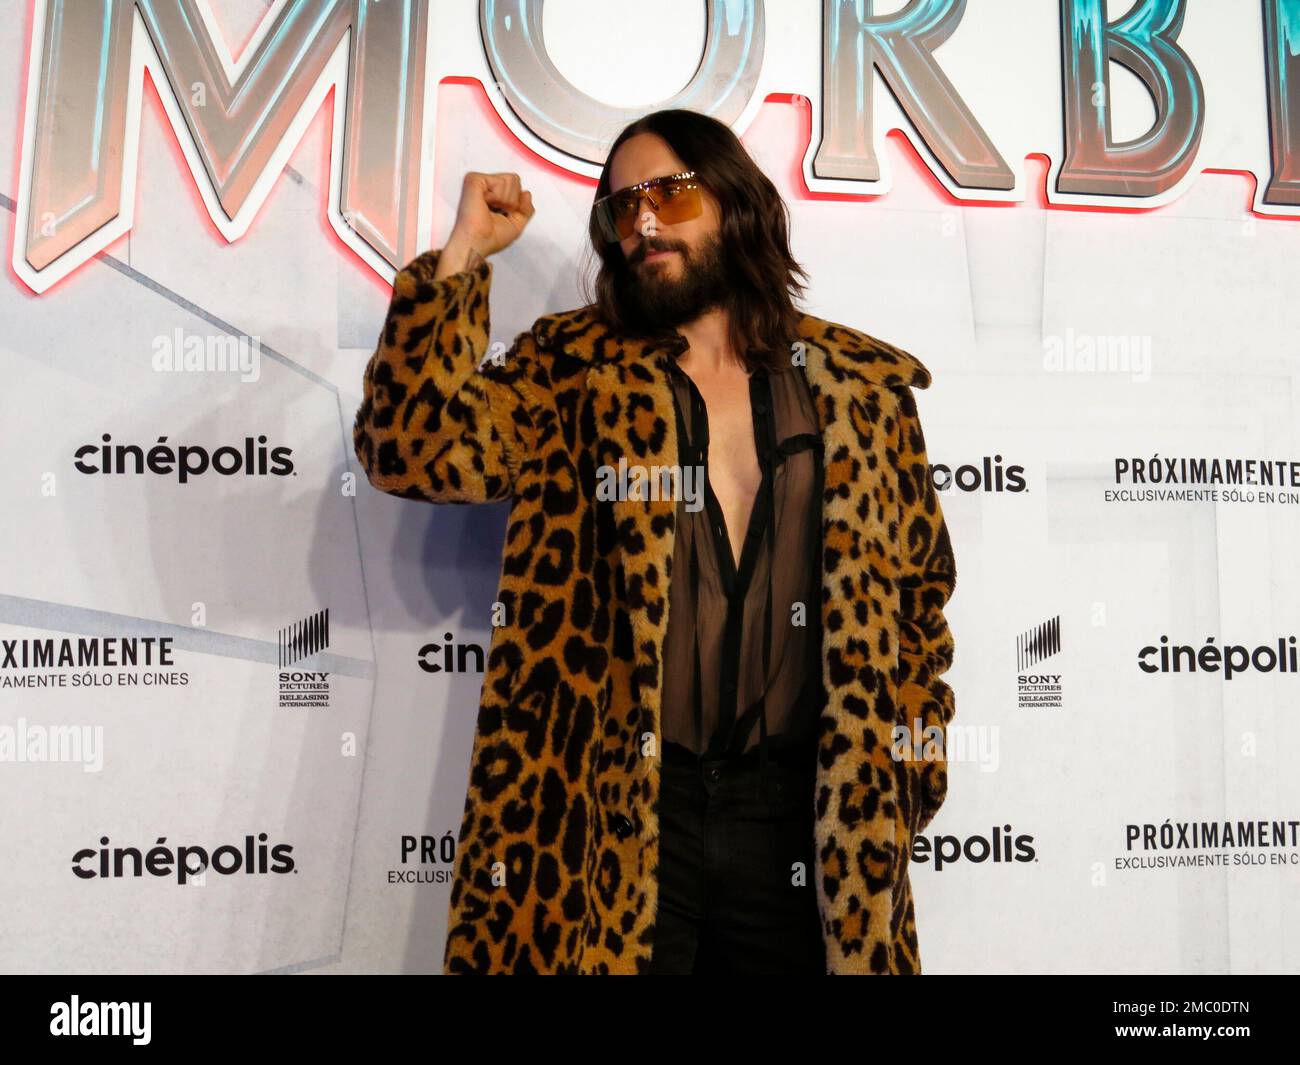 Jared Leto attends the red carpet event for Marvels film Morbius in Mexico City, Thursday, March 10, 2022